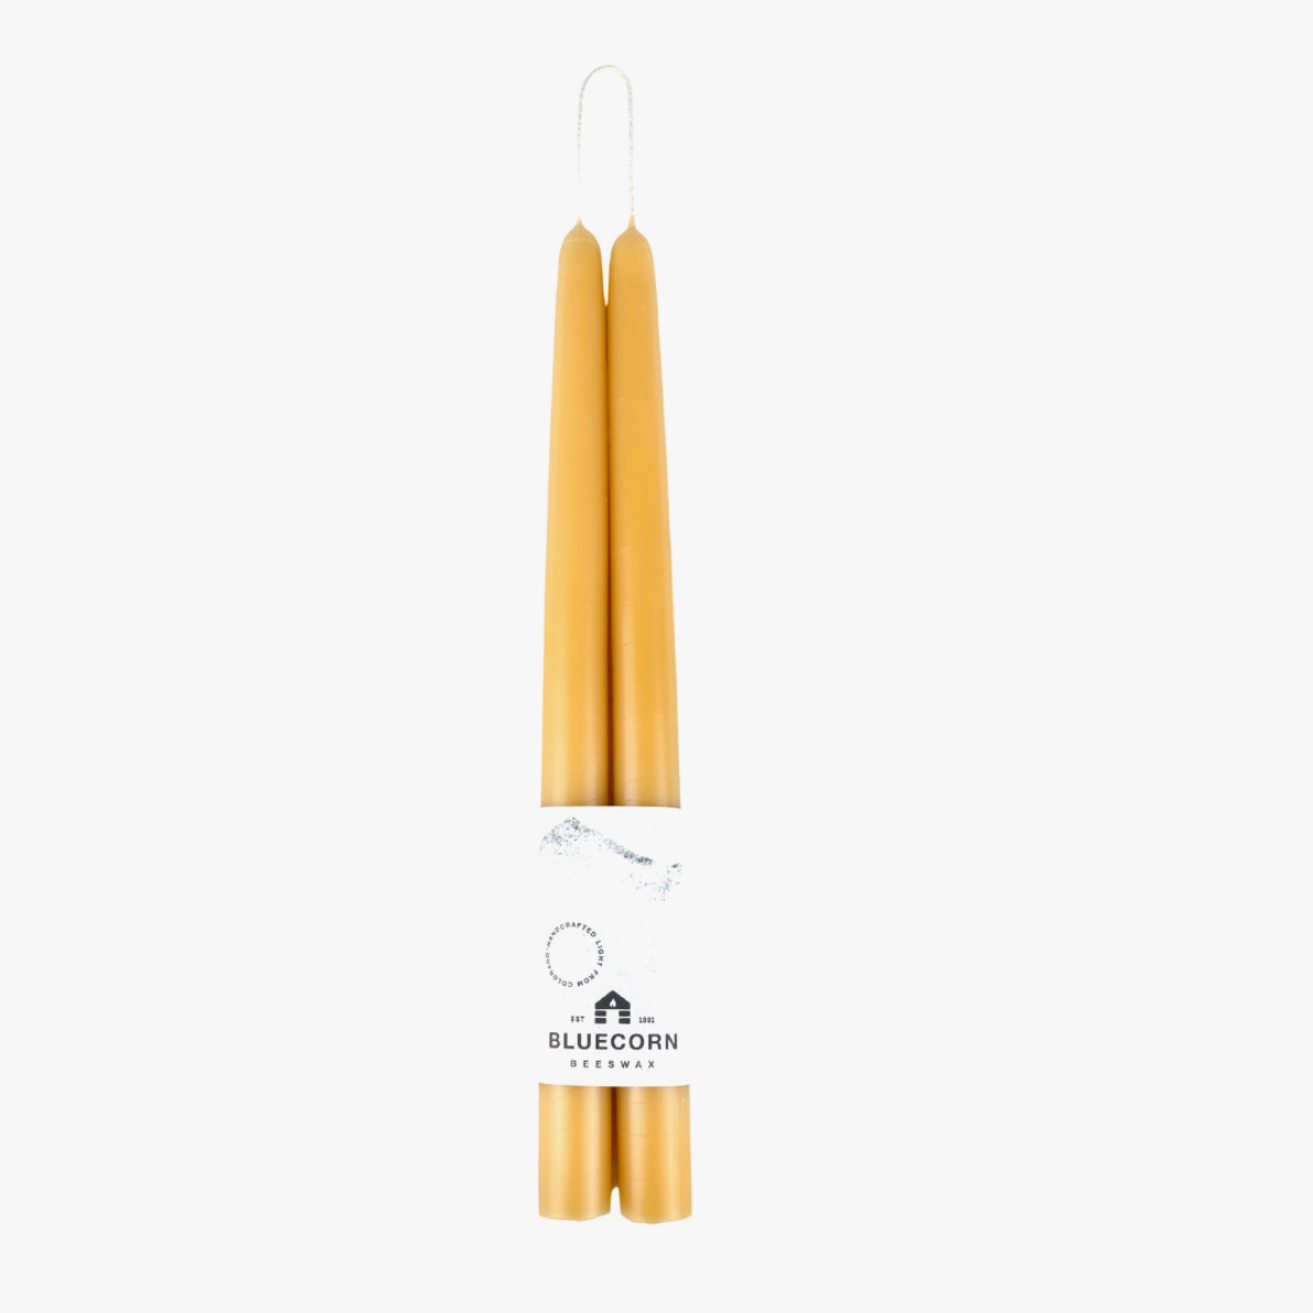 Hand Dipped Beeswax Taper Candles, 12 inch